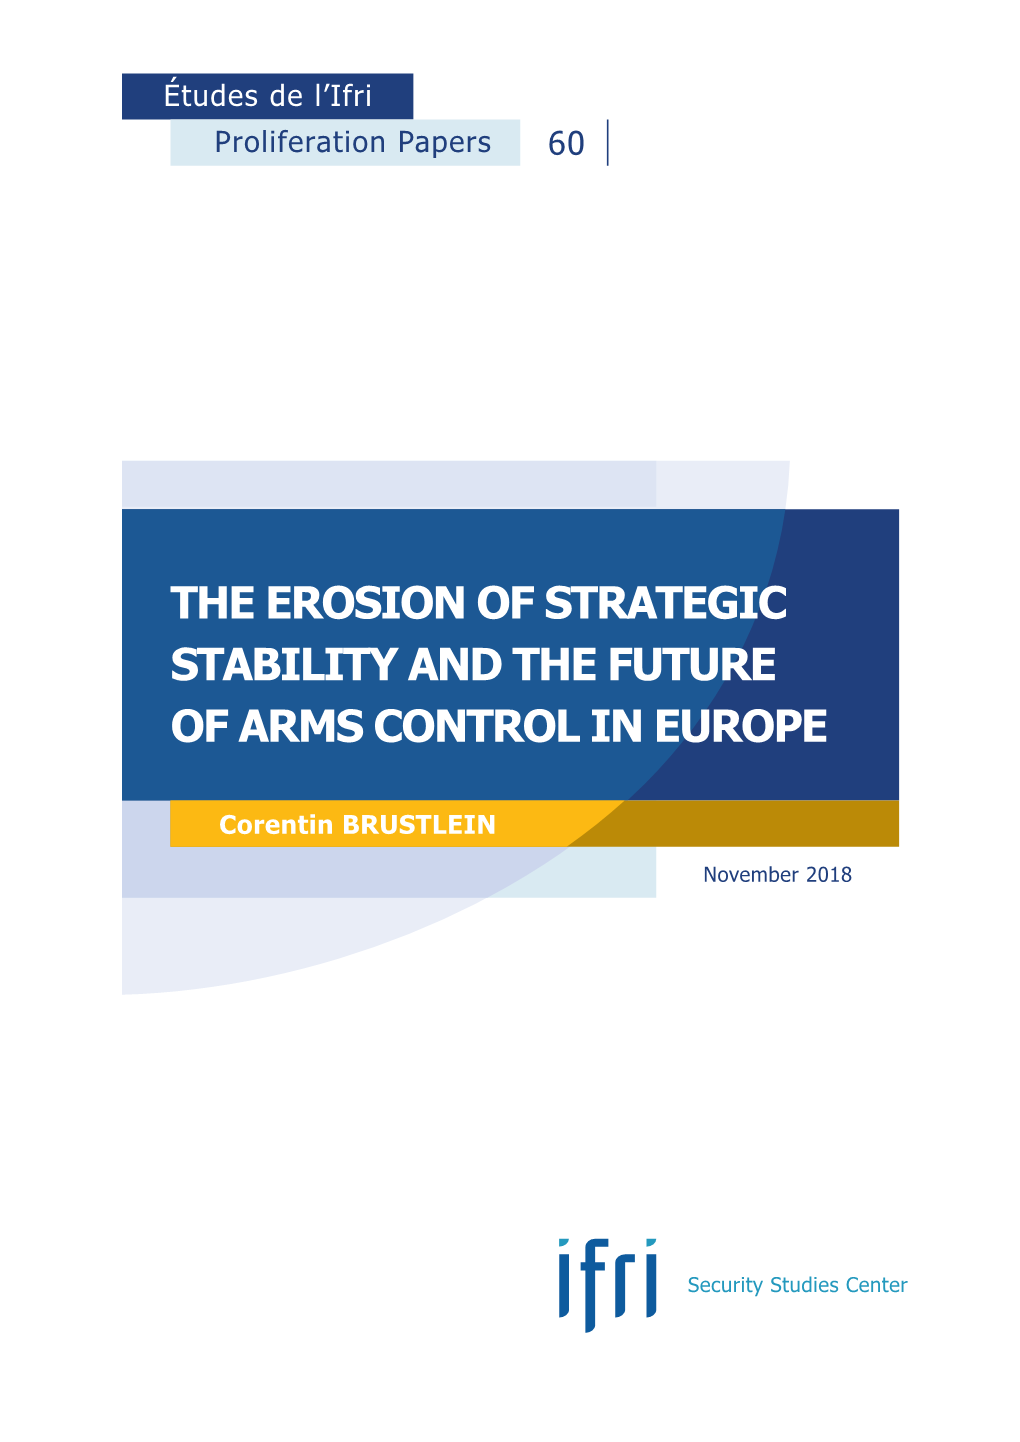 The Erosion of Strategic Stability and the Future of Arms Control in Europe